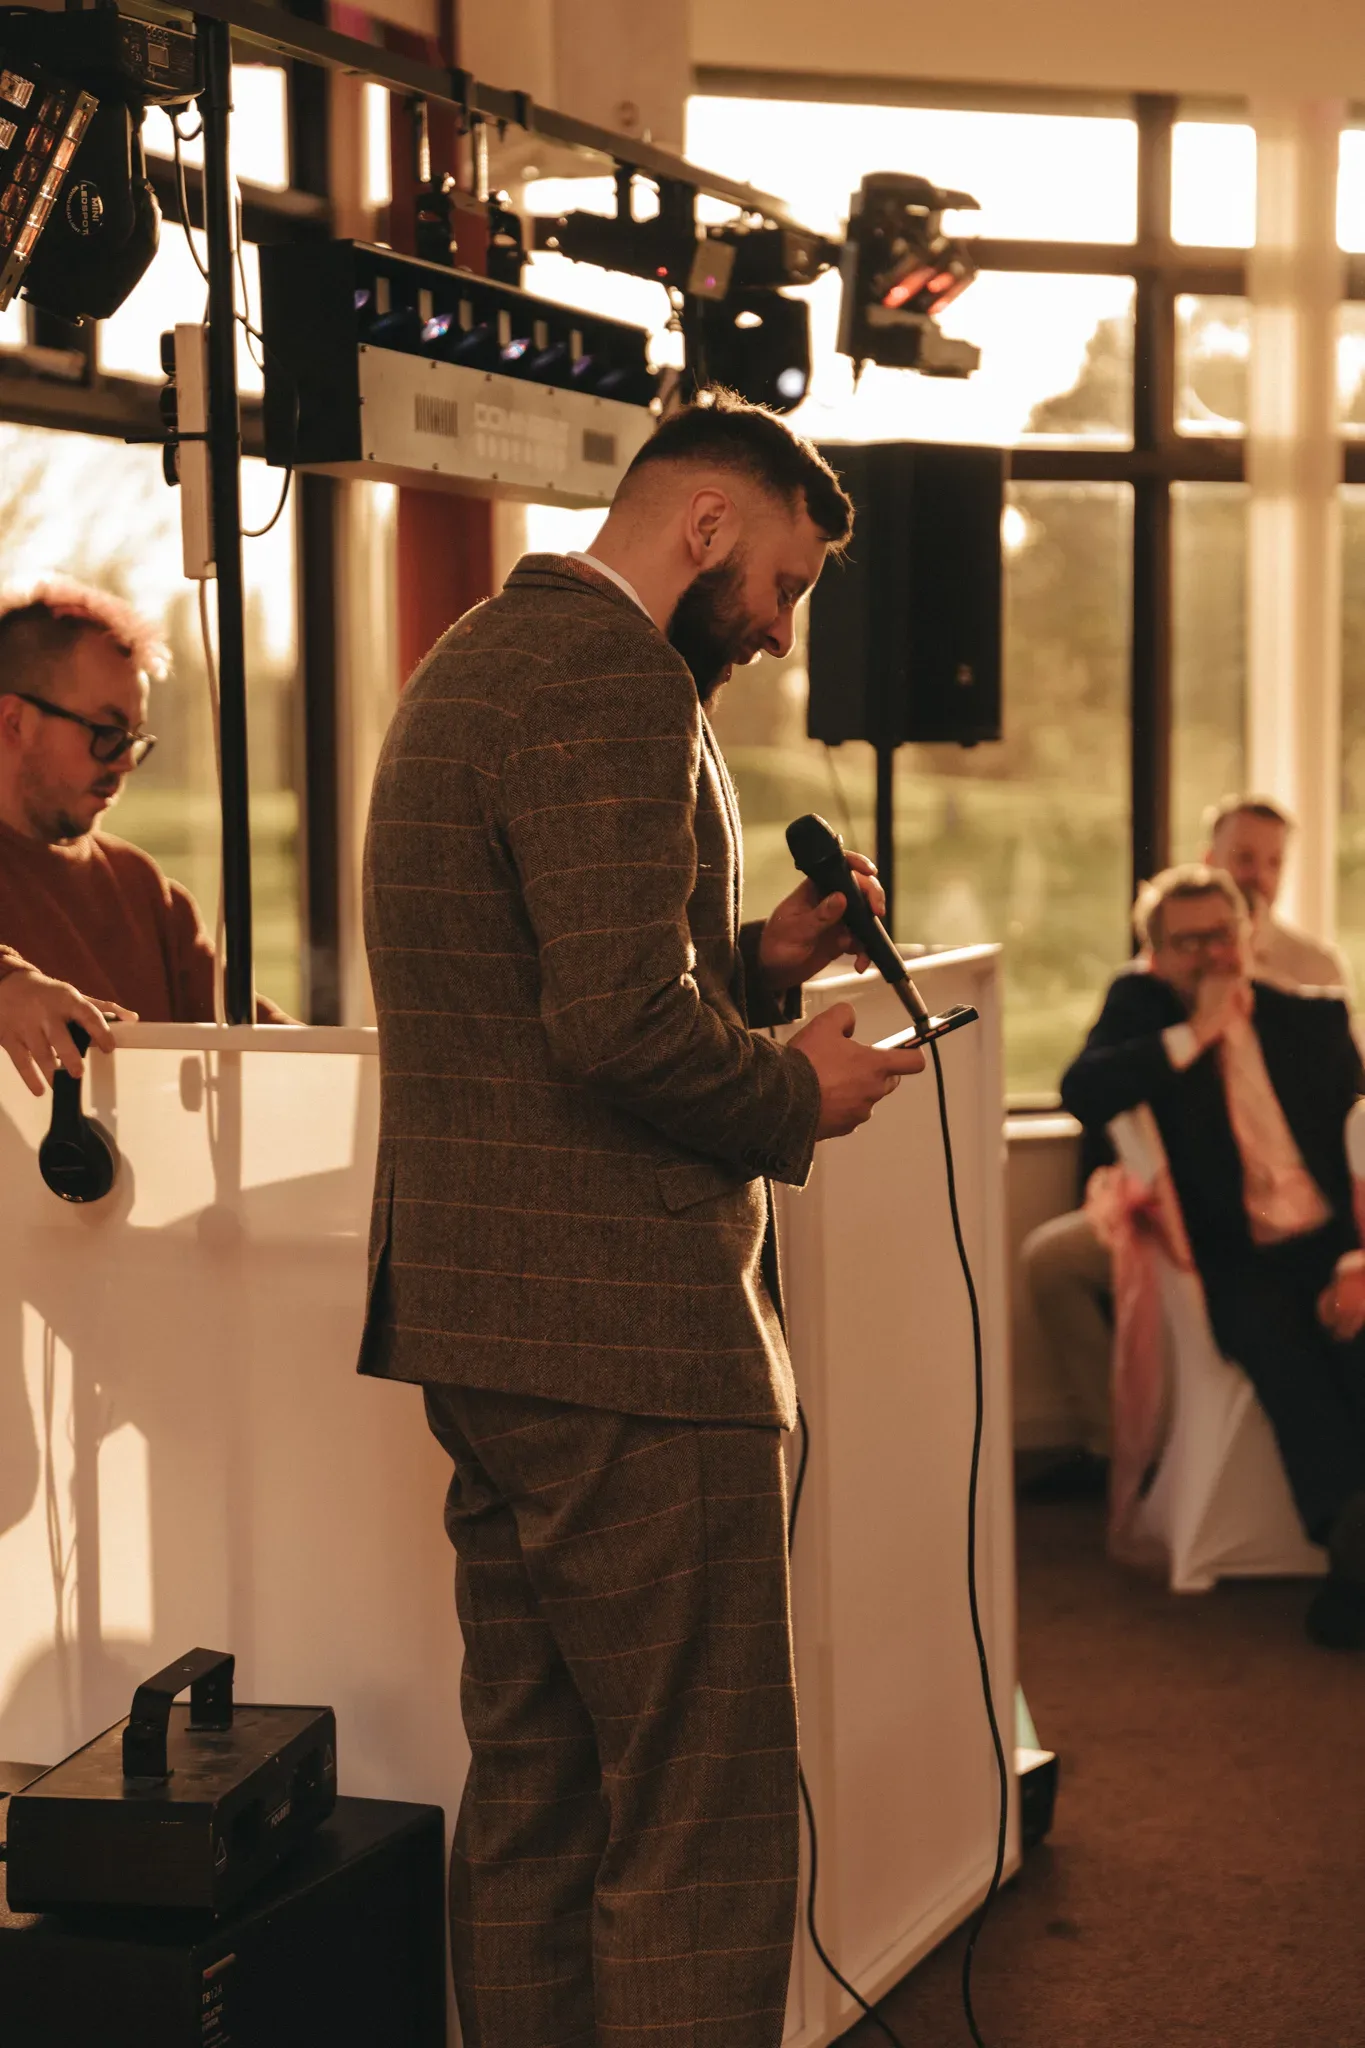 A man in a tweed suit delivering a speech at a podium with a microphone, with attentive guests in the background during a sunset event. bright sunlight casts warm glows through large windows.